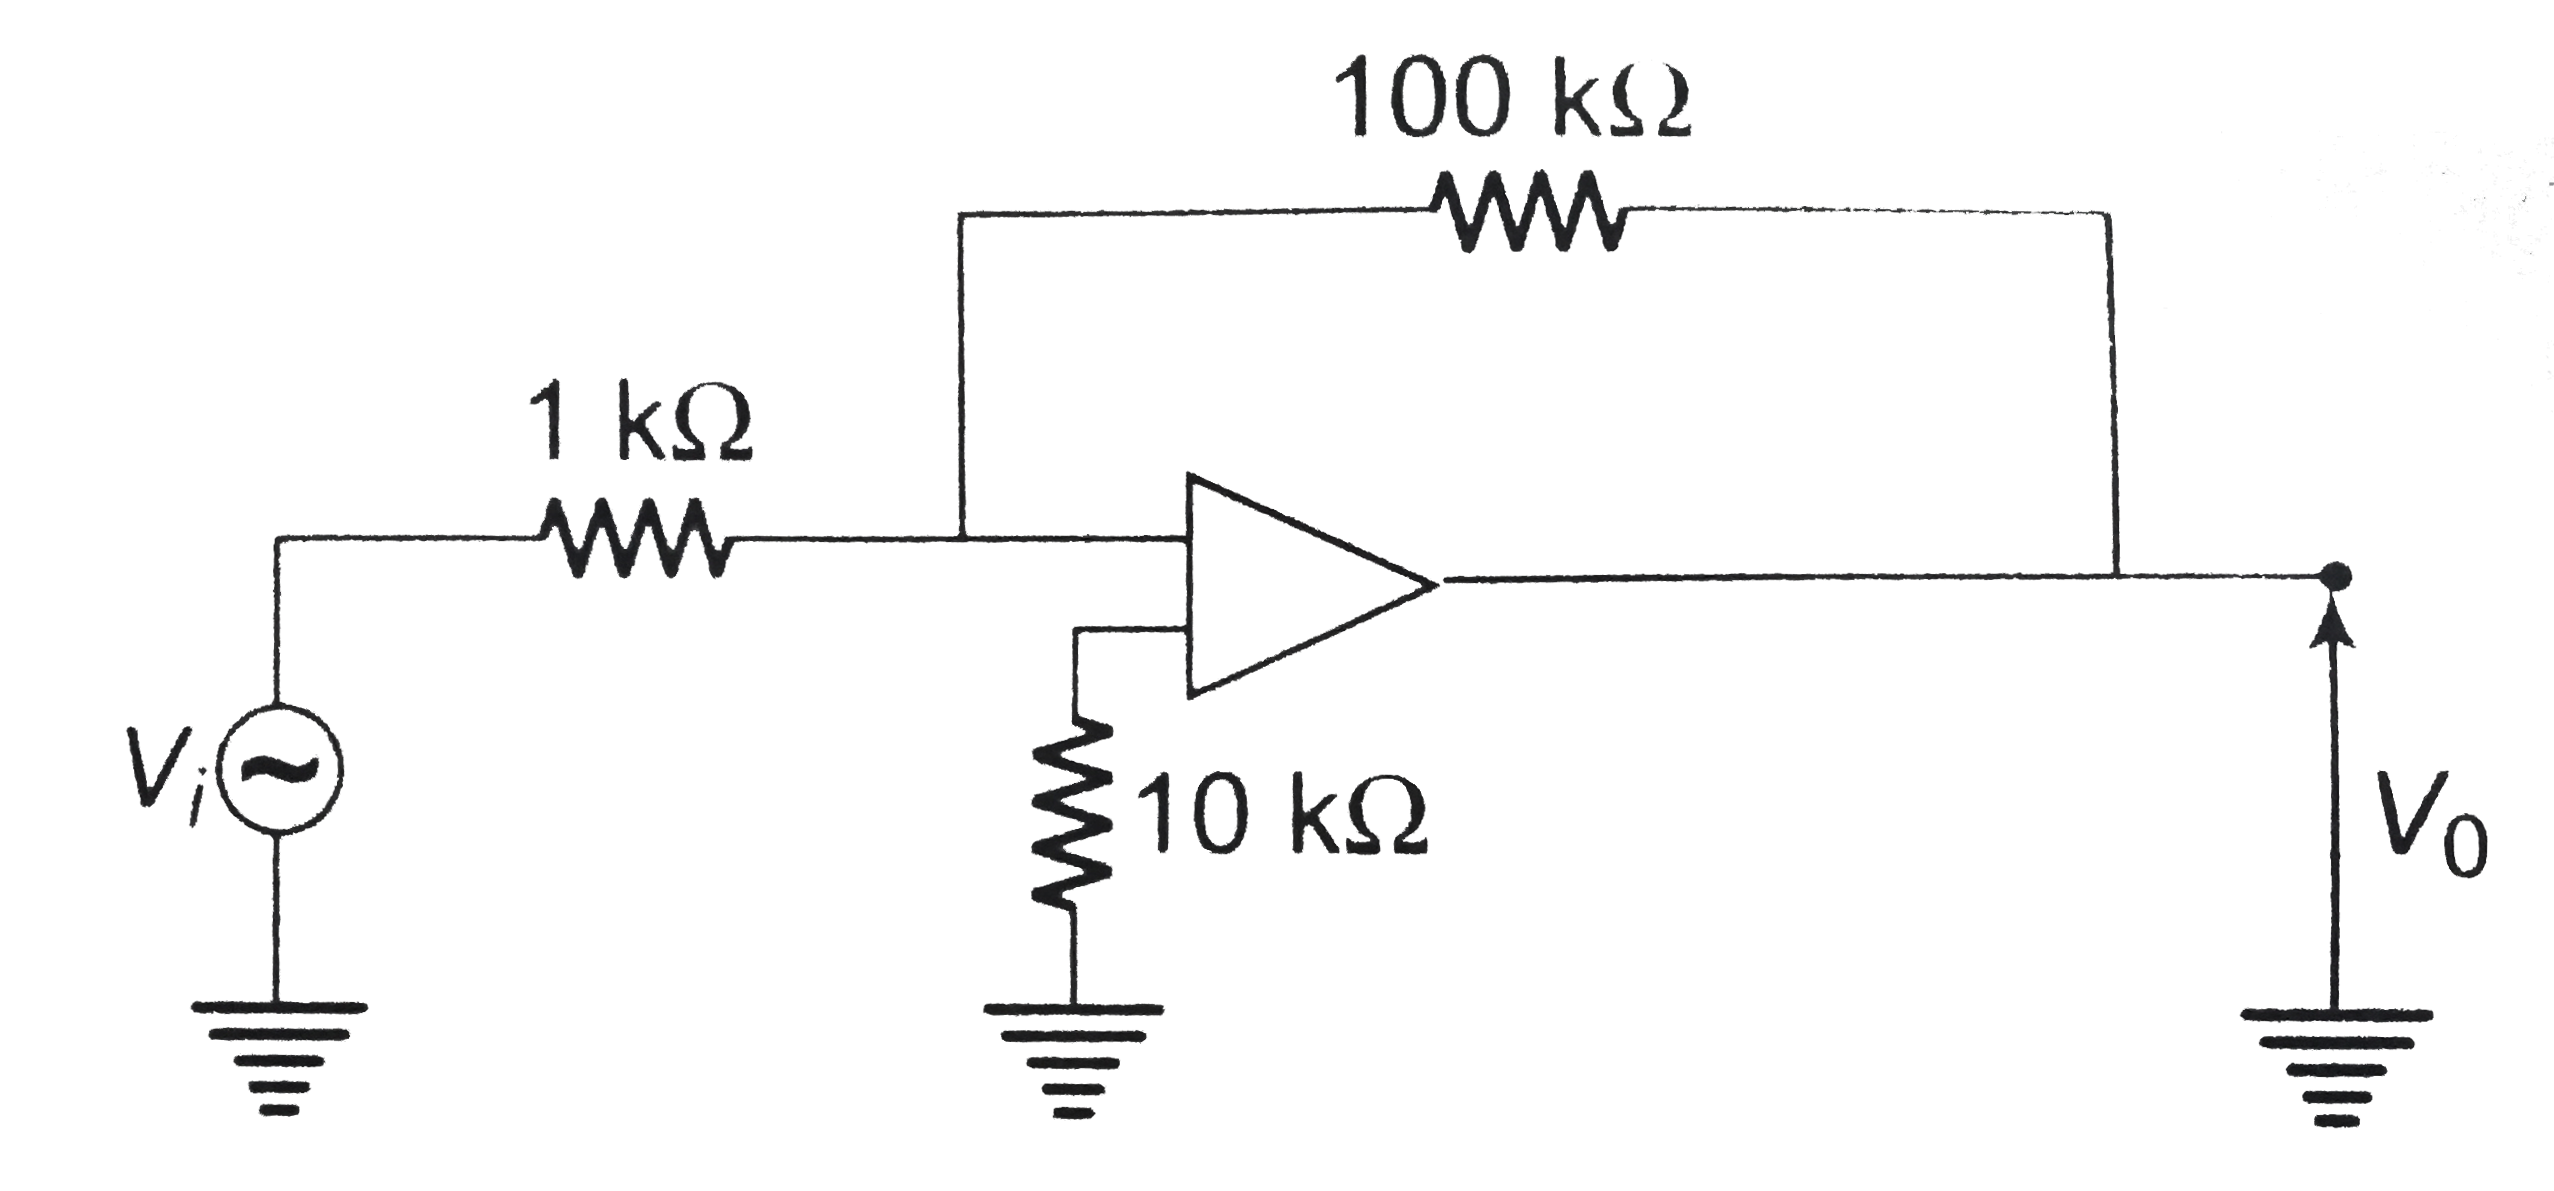 The voltage gain of the following amplifier is